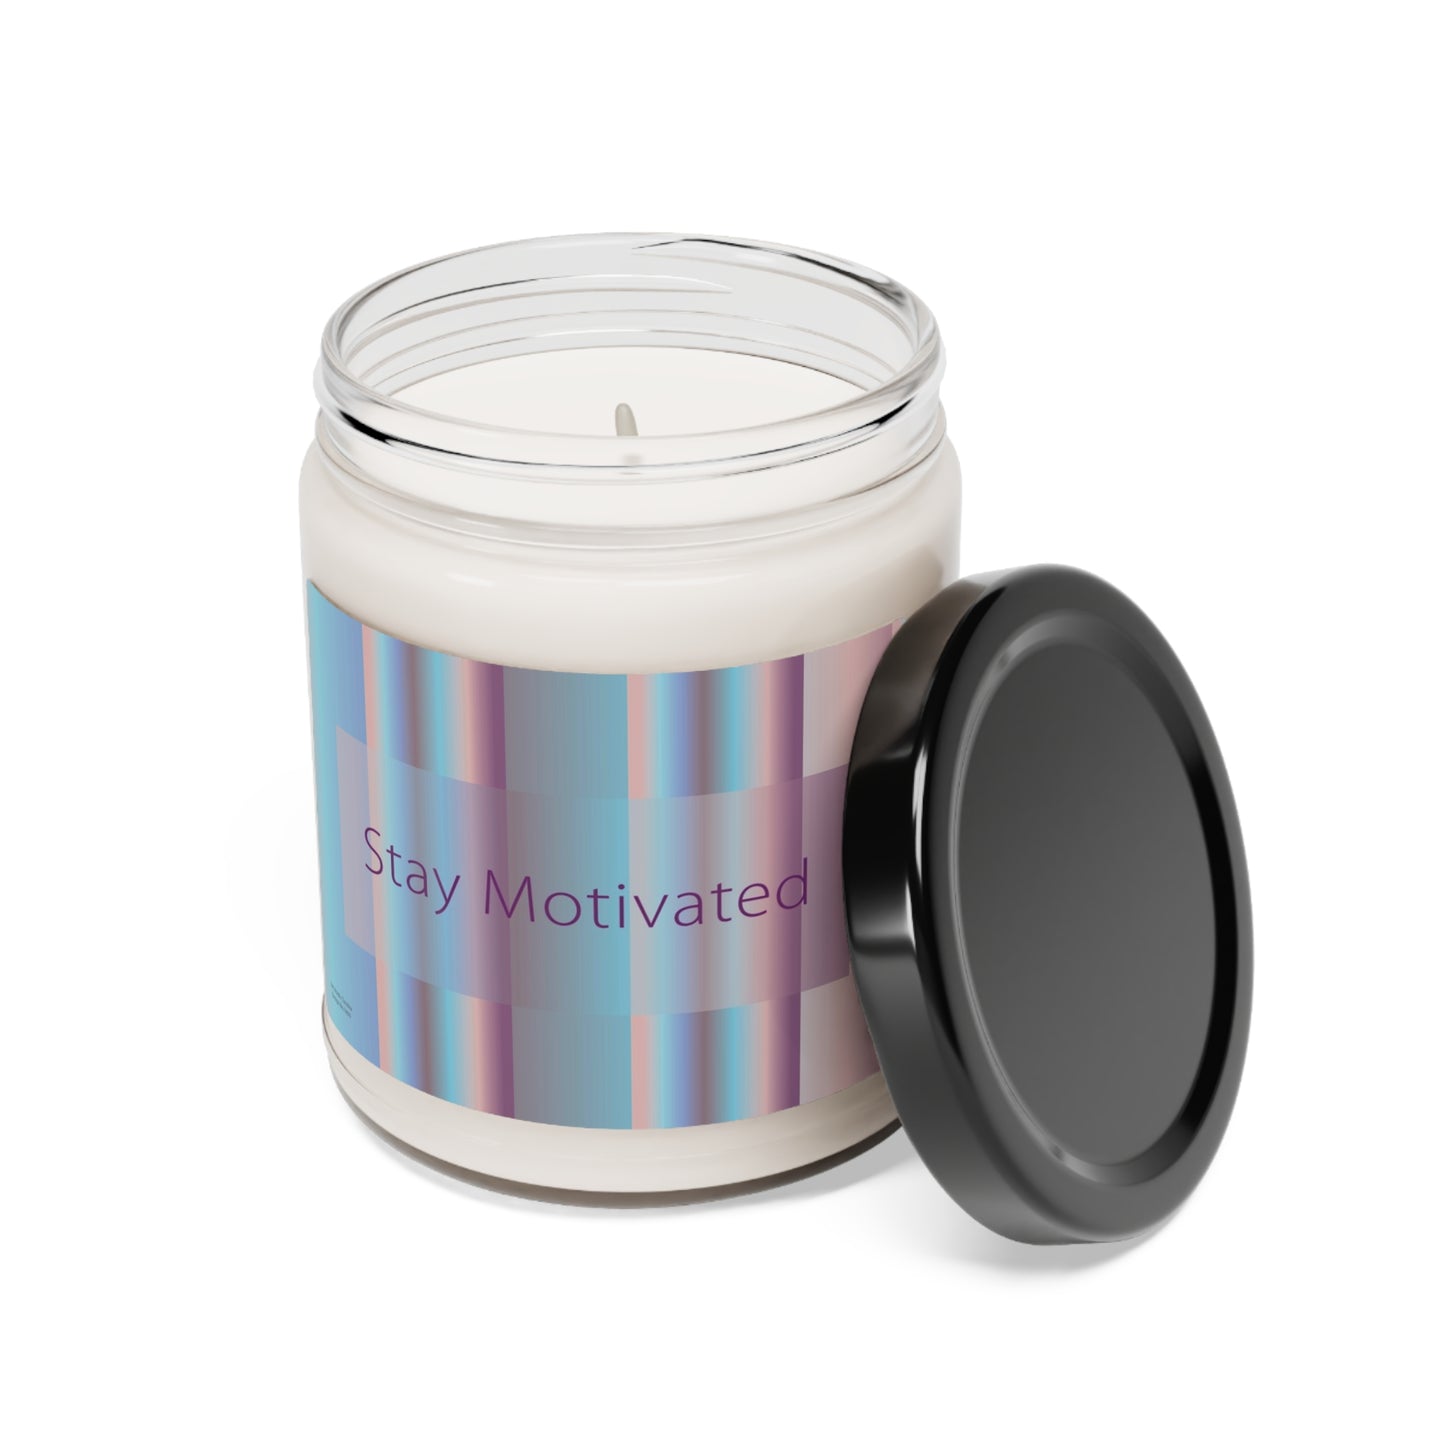 Scented Soy Candle, 9oz Stay Motivation - Design No.1800